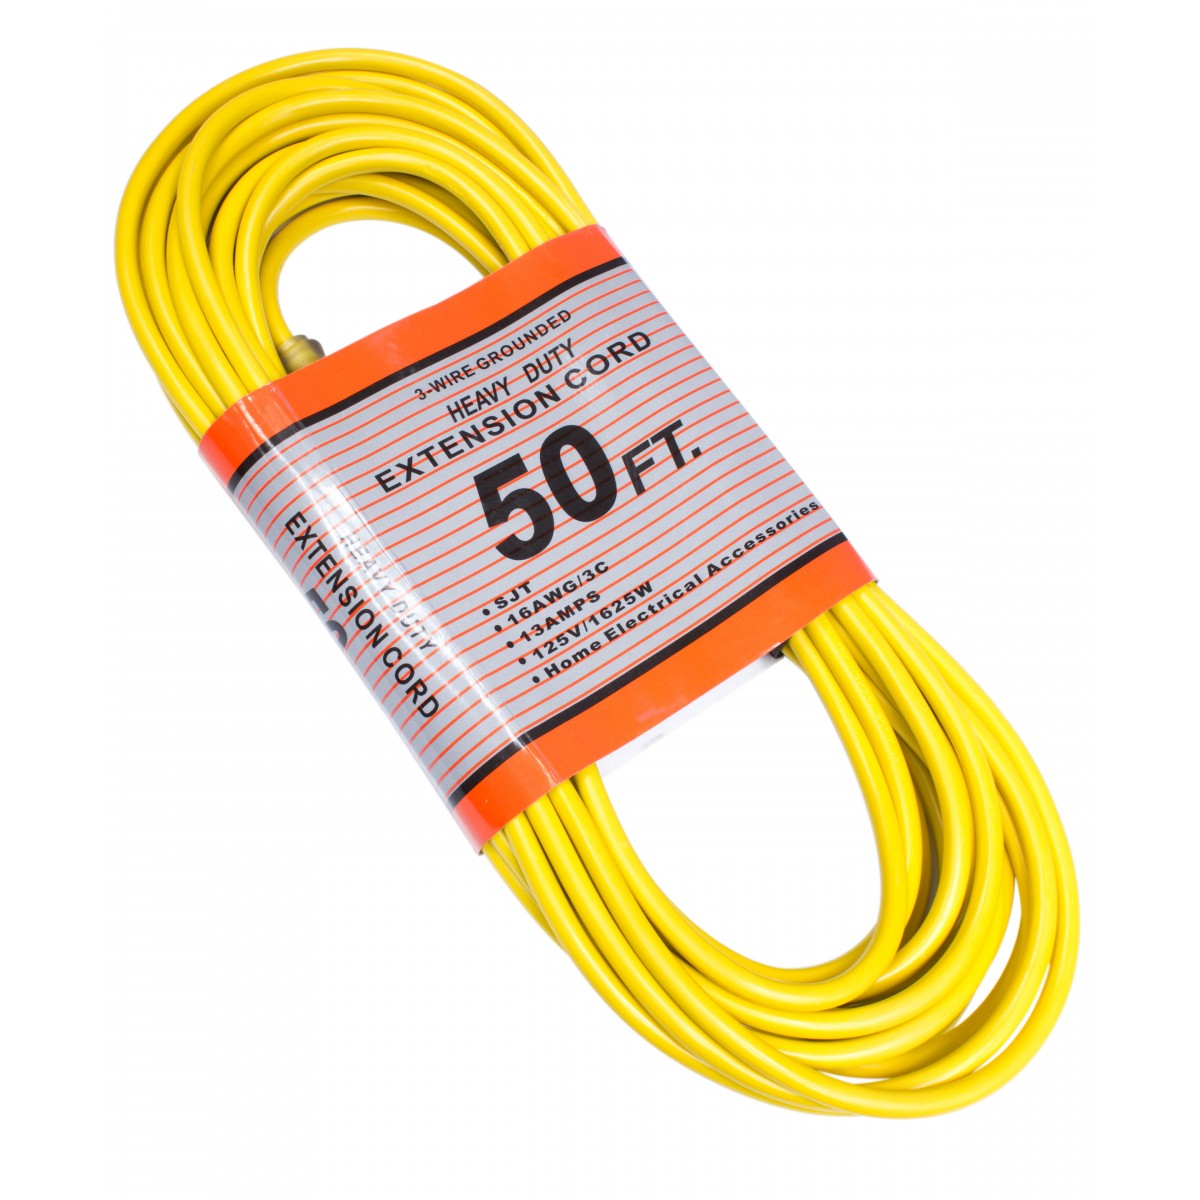 50 U0026 39  Extension Cord  3 Wires  Grounded  13 A  125 V Yellow